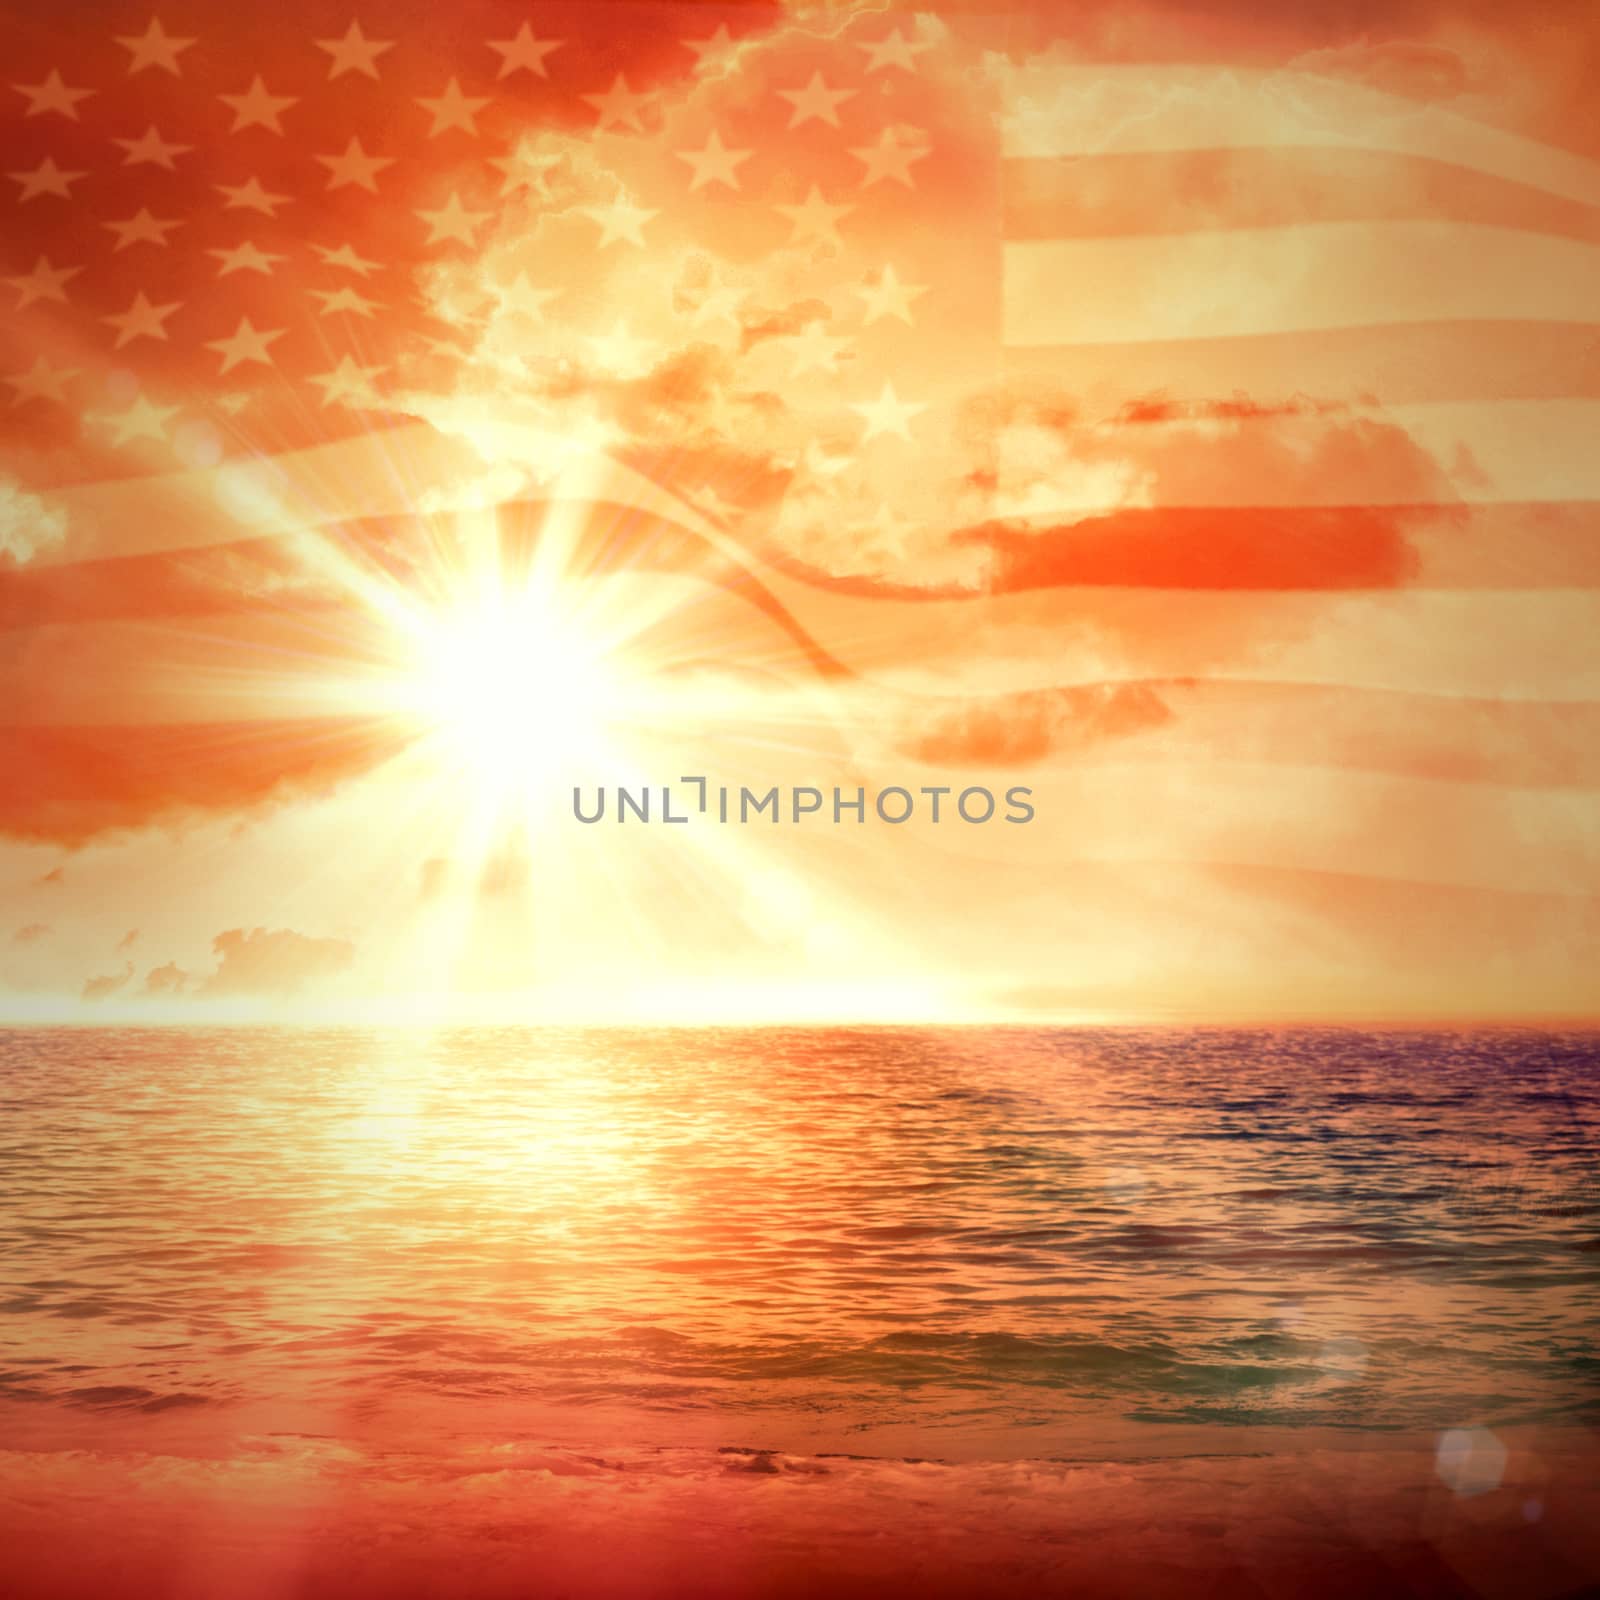 Composite image of digitally generated united states national flag by Wavebreakmedia